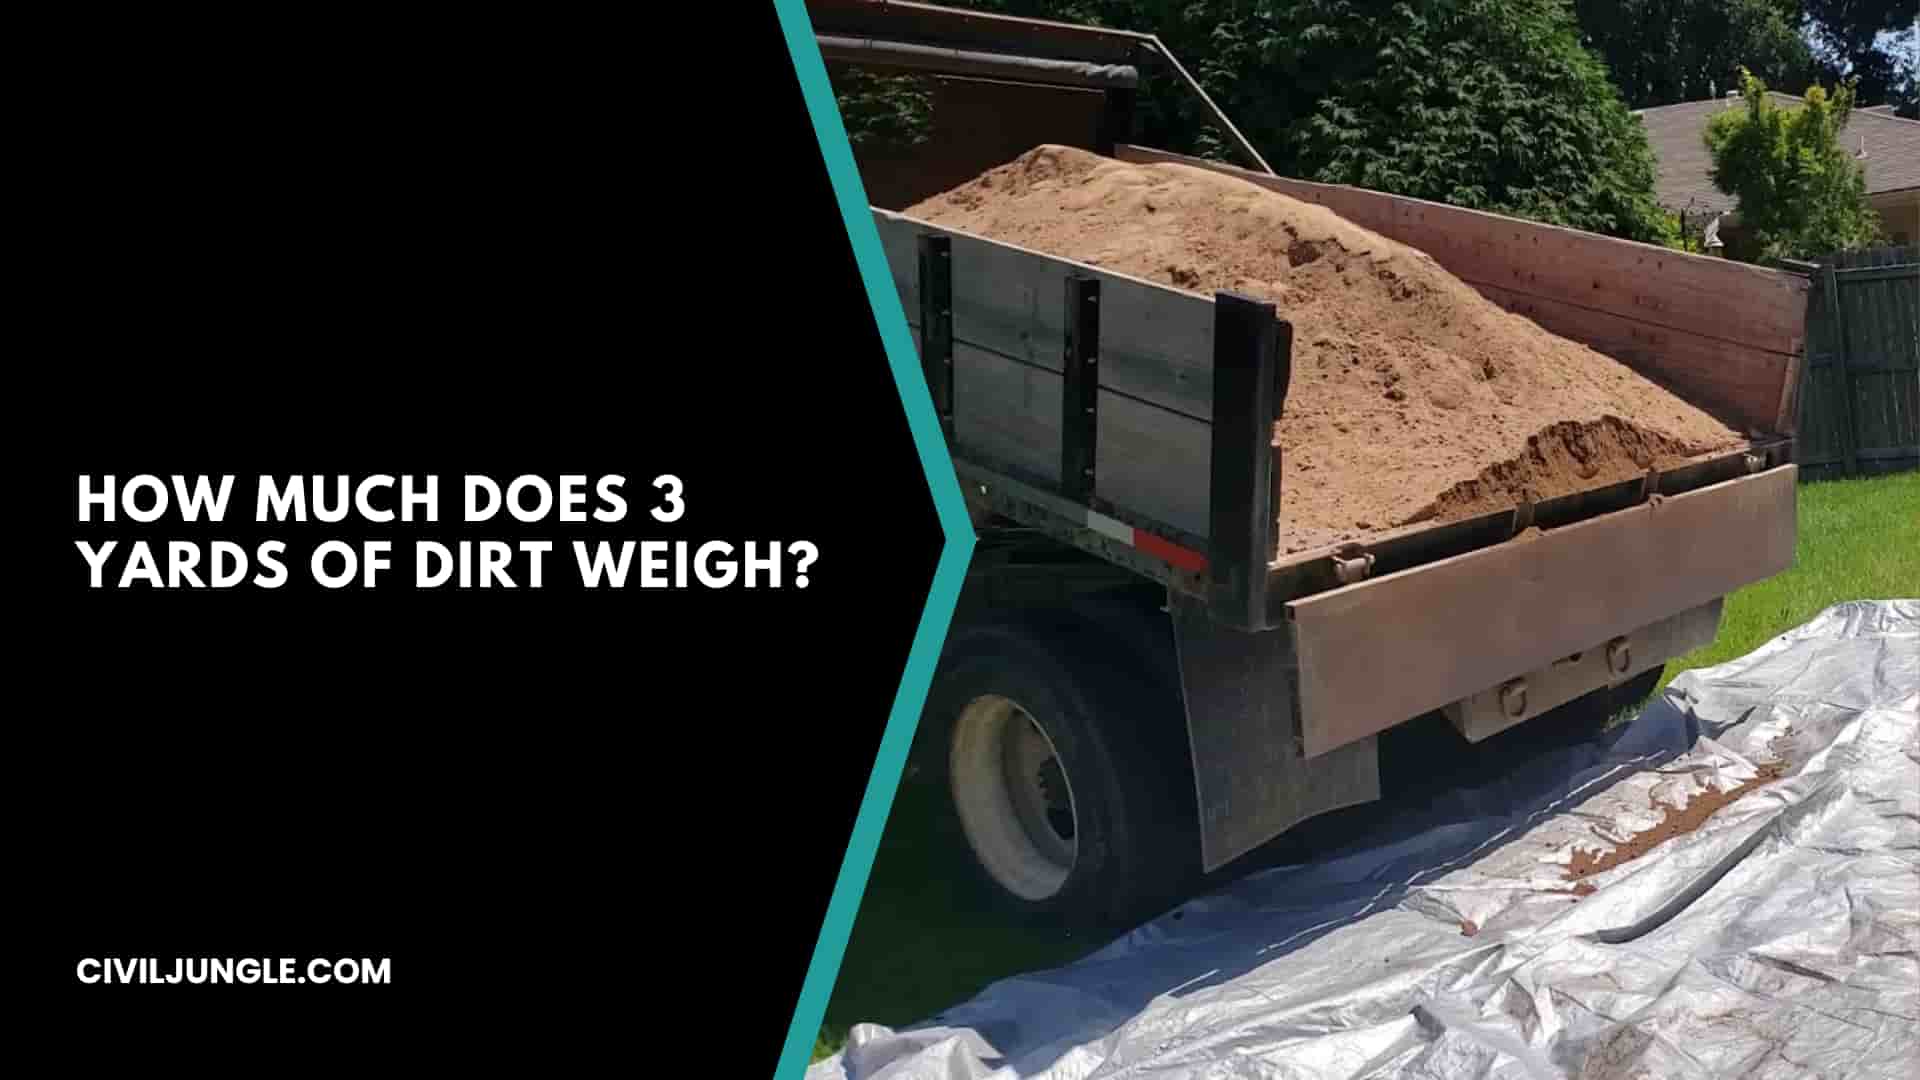 How Much Does 3 Yards of Dirt Weigh?